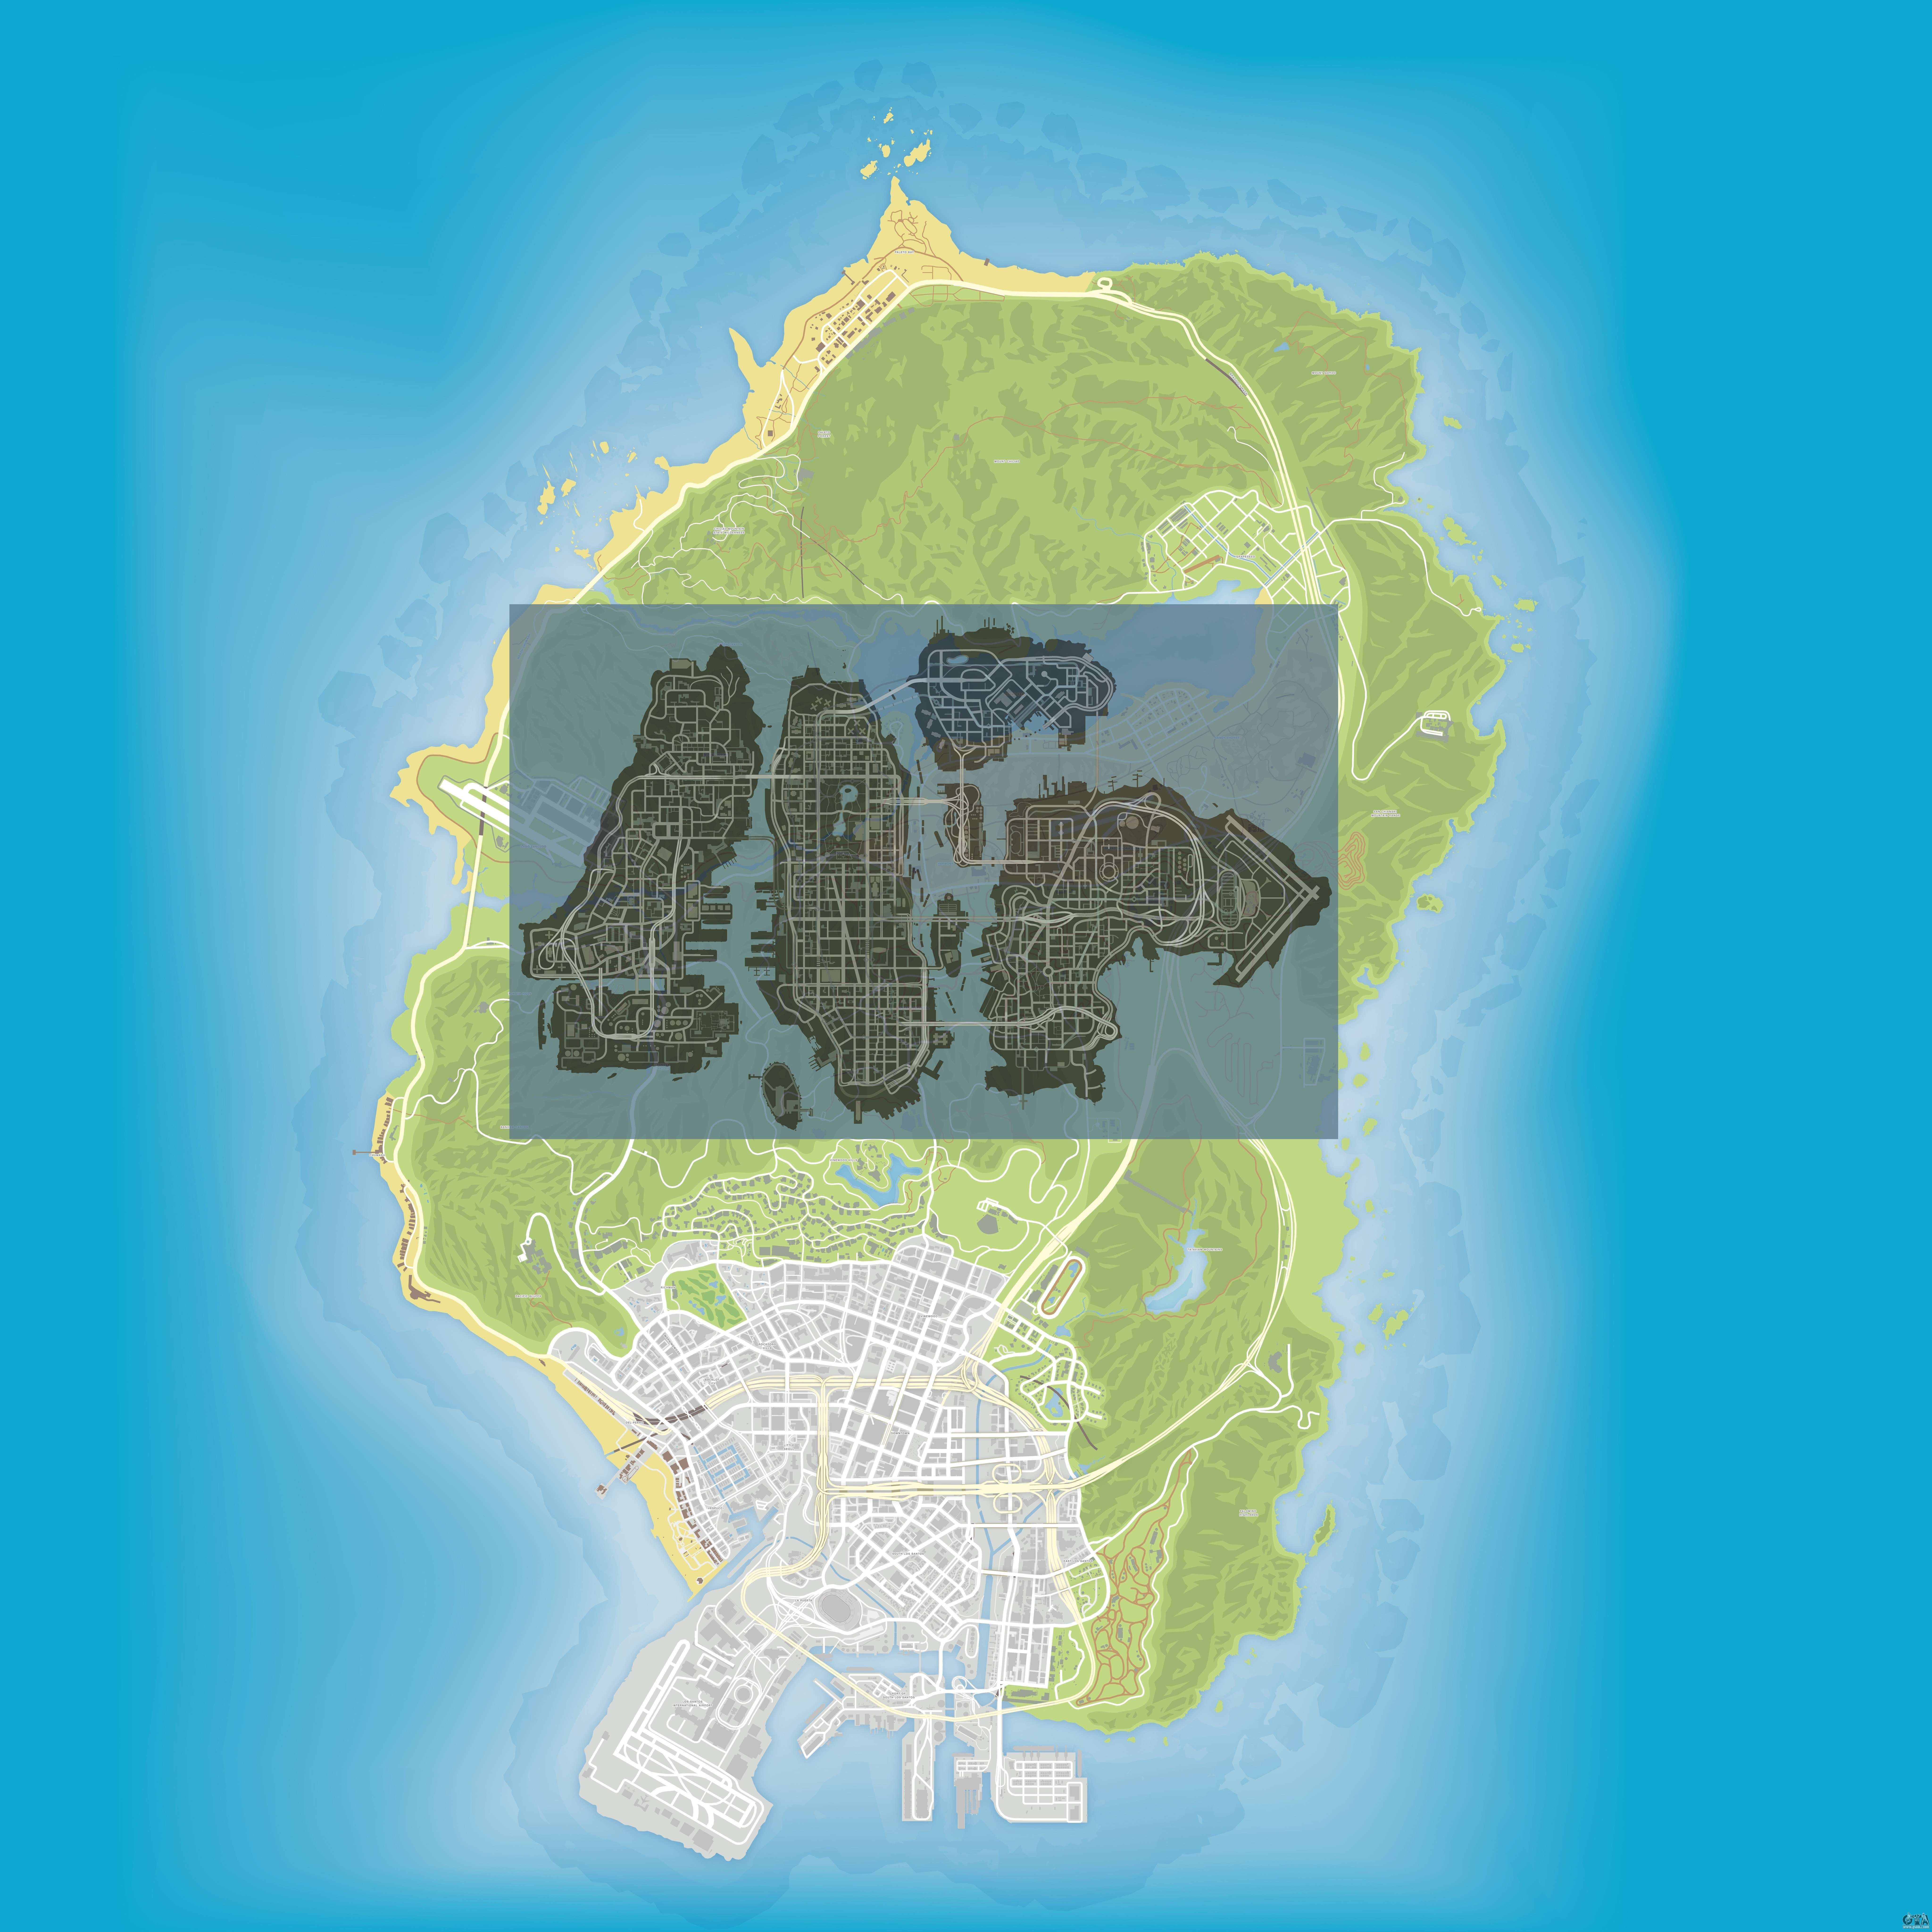 GTA San Andreas vs GTA 5: Comparing the maps of the two games